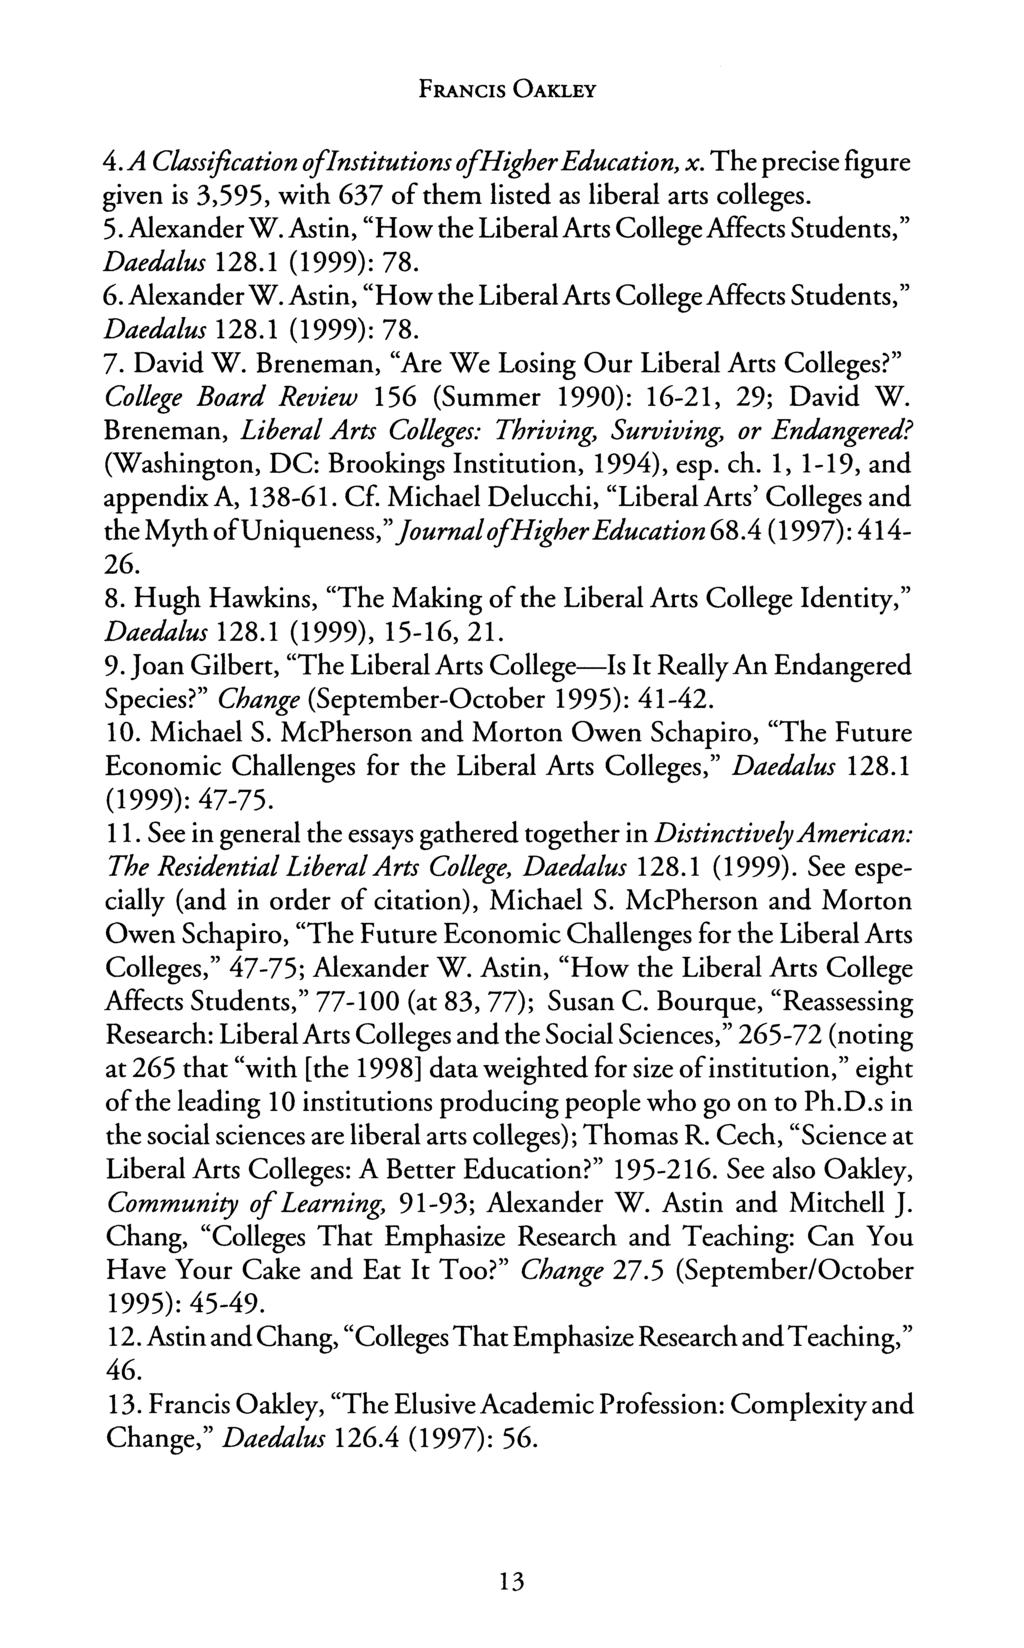 FRANCIS OAKLEY 4. A Classification oflnstitutions ofhighereducation, x. The precise figure given is 3,595, with 637 of them listed as liberal arts colleges. 5. Alexander W.